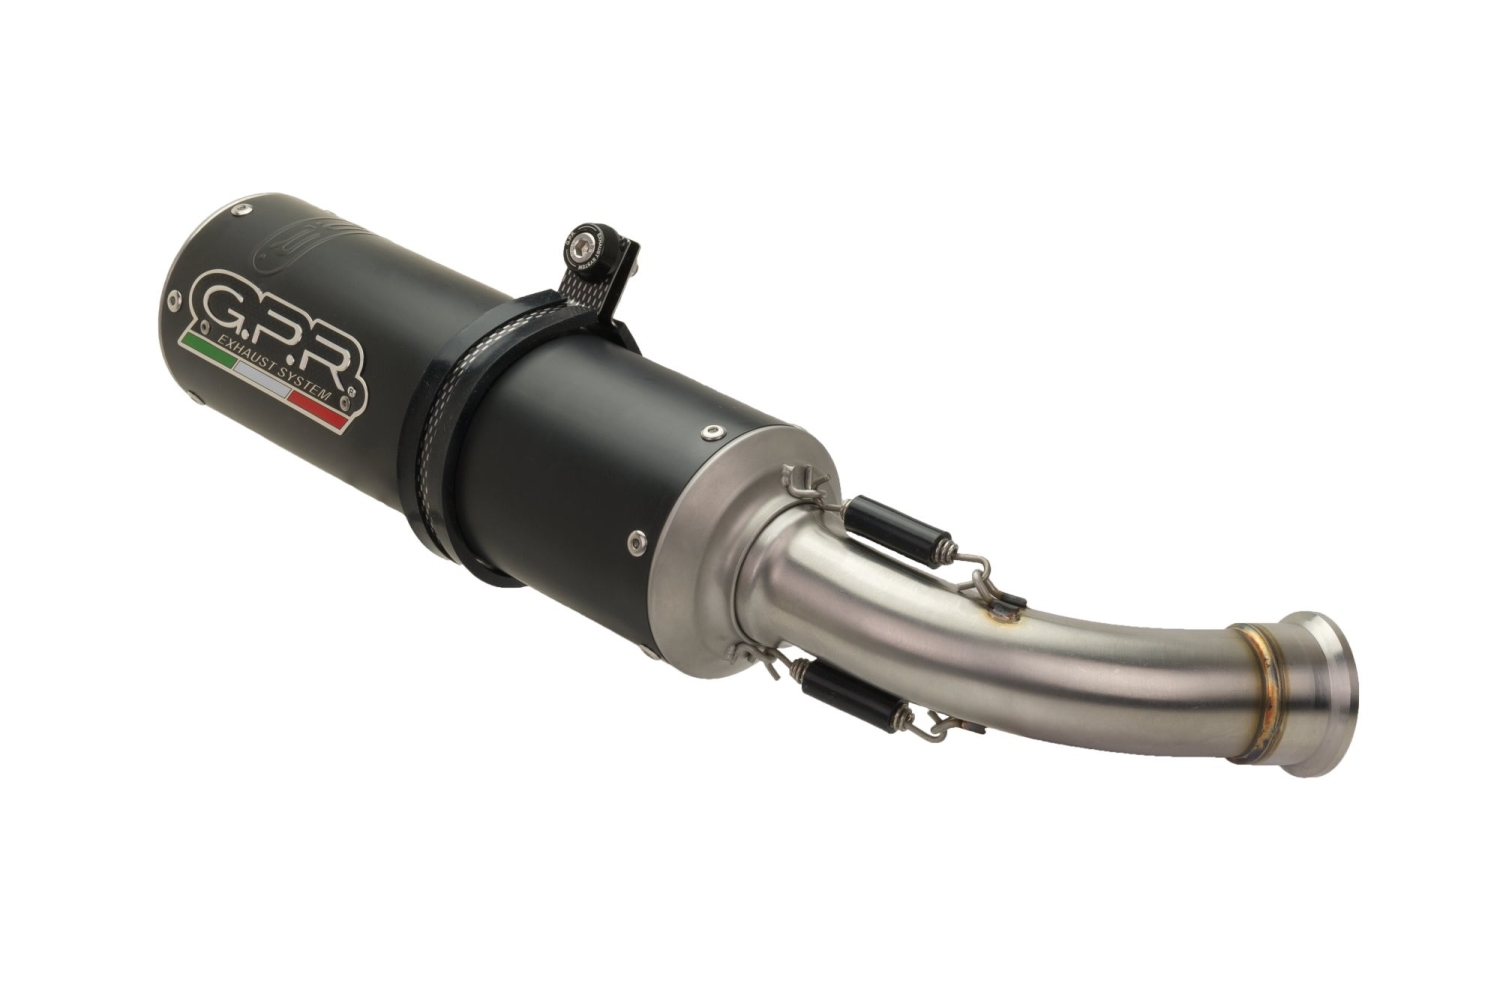 Exhaust system compatible with Fantic Motor XMF 125 2021-2023, M3 Black Titanium, Homologated legal slip-on exhaust including removable db killer, link pipe and catalyst 